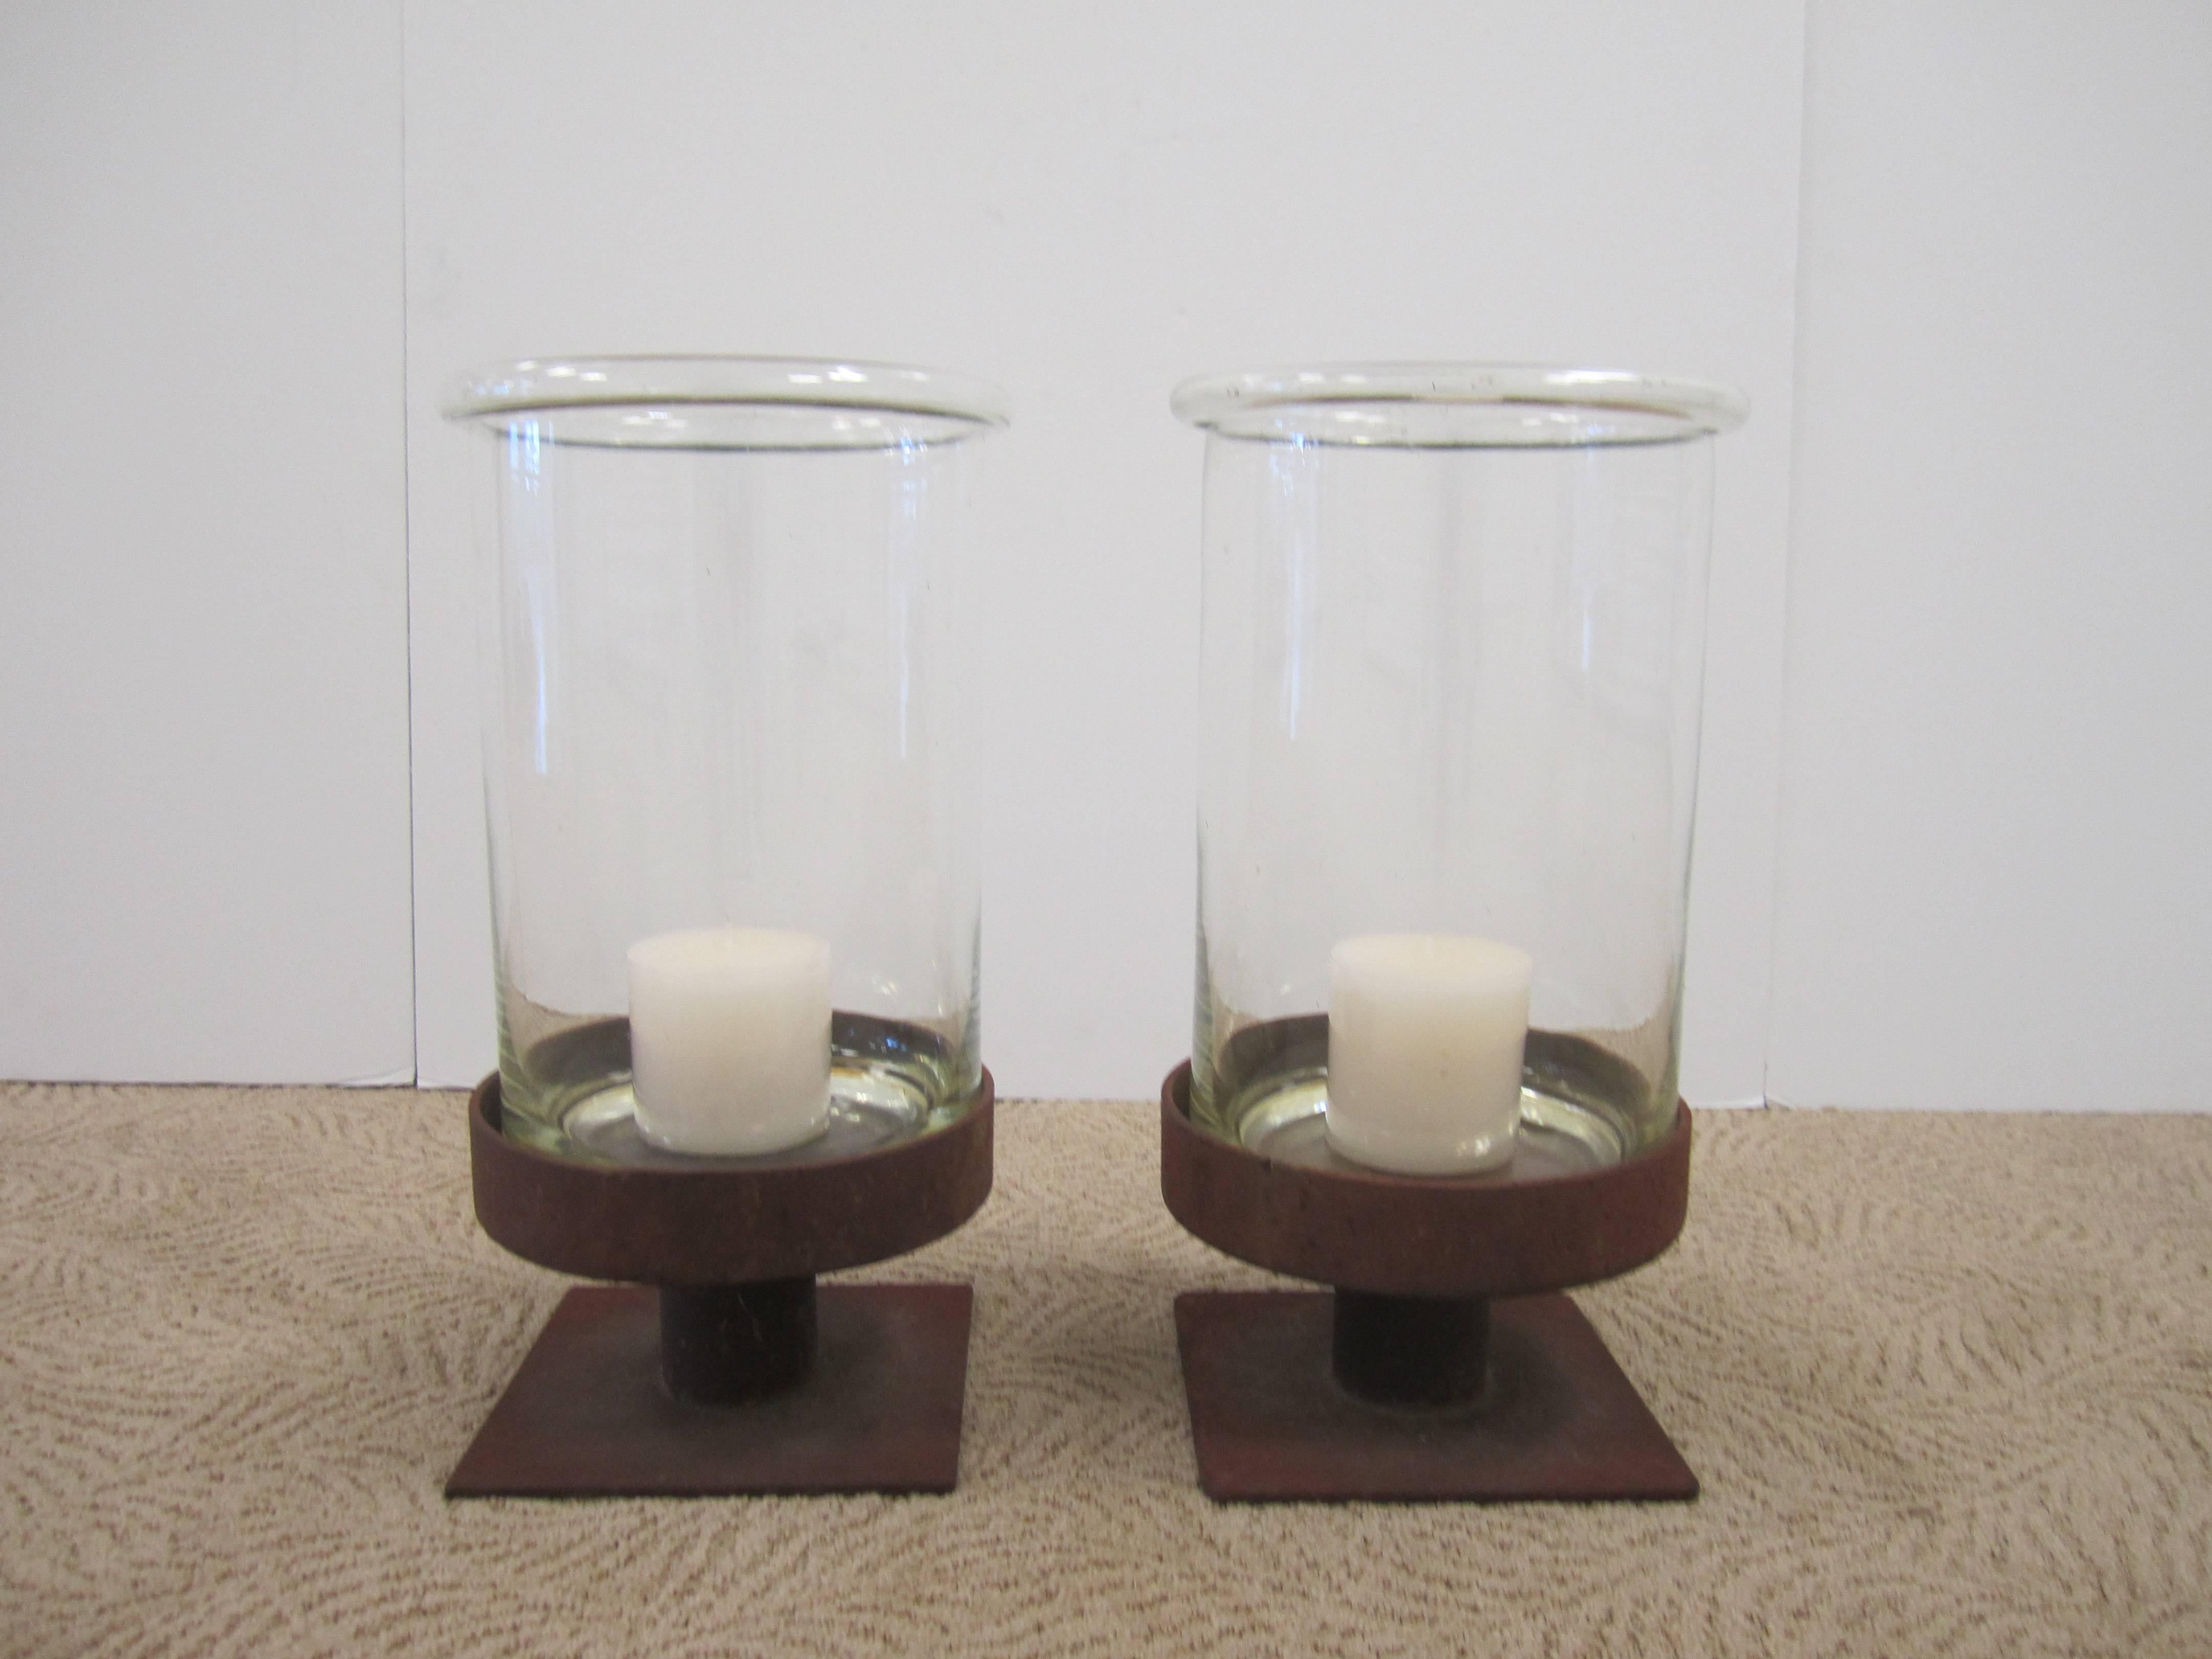 Pair/set available here for $1250
A substantial pair of vintage Modern style European glass and iron hurricane candle lamps. Bases are weathered iron, and 'hurricane' vessel is glass; glass is beautifully made with a smooth folded lip or rim.